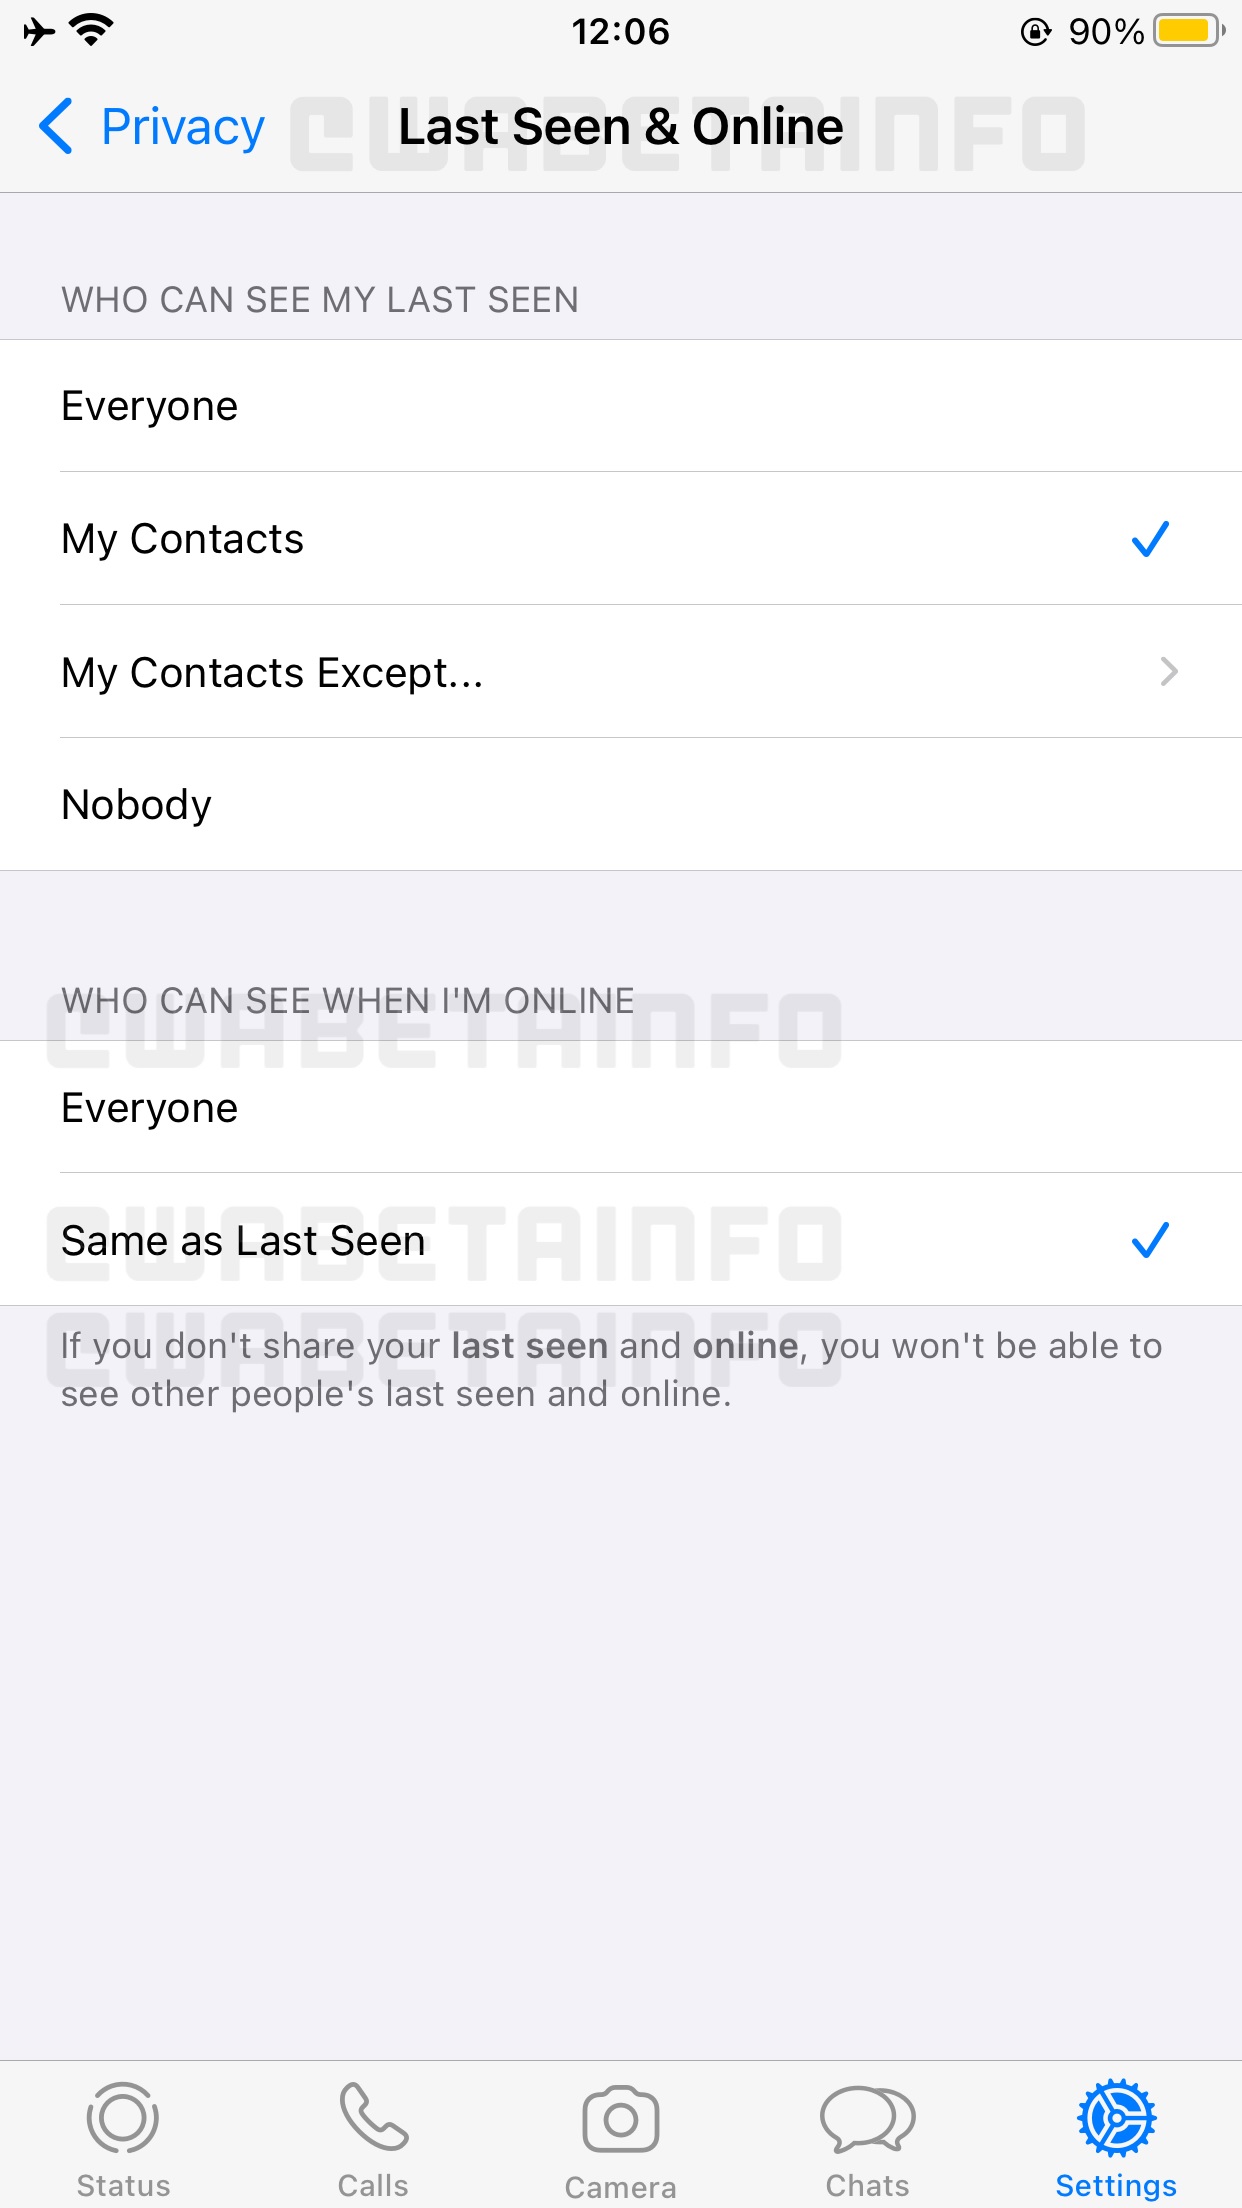 Non-contacts won’t be able to see when you’re online.—WA Beta Info